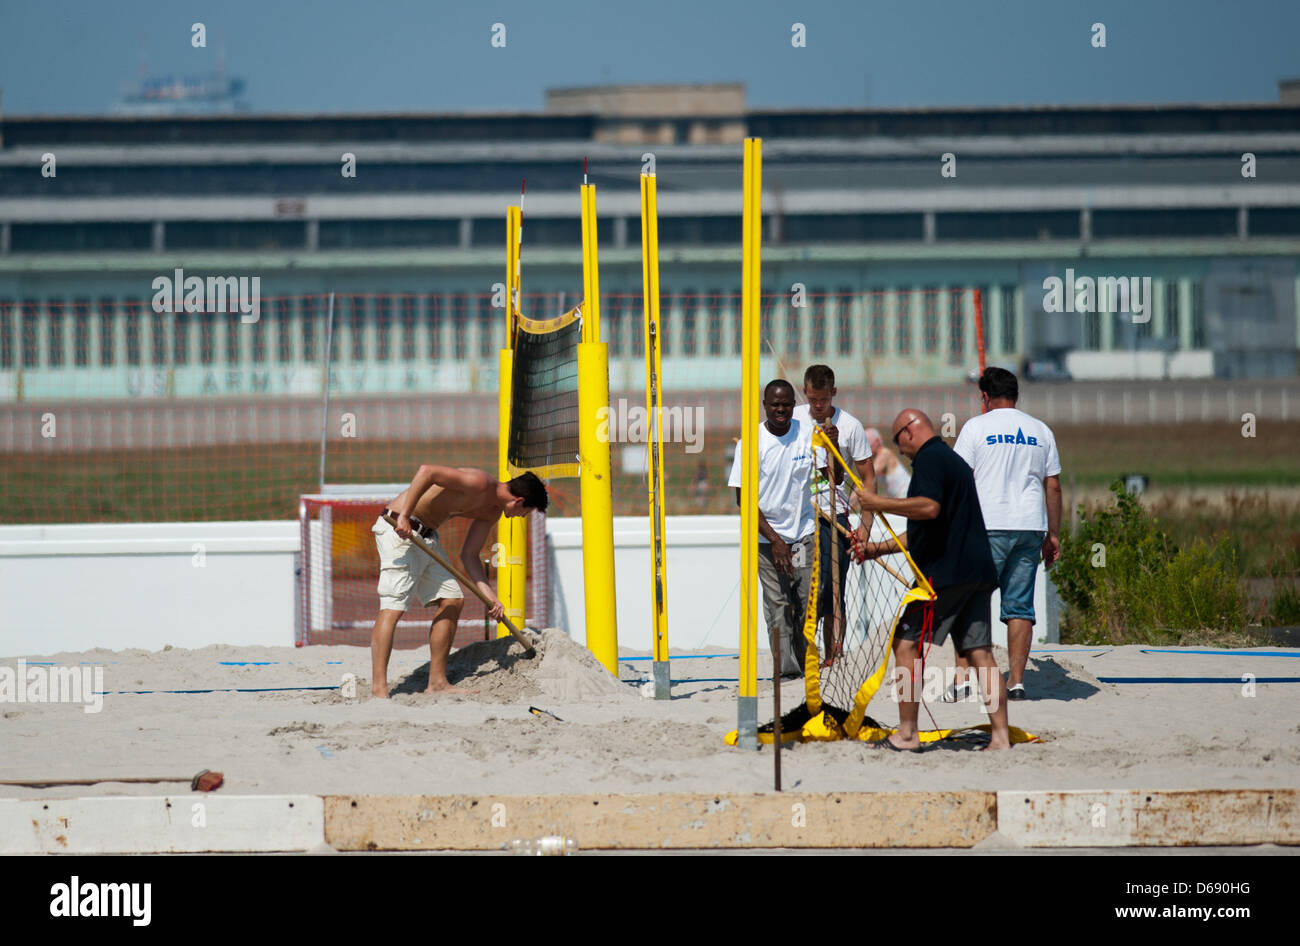 Works build a beach volleyball field for the Olympic Fan Mile at Tempelhofer Feld in Berlin, Germany, 25 July 2012. 'The Games in Berlin' is the name of the live broadcast event by the Berlin Hockey Club (BHC) where the Summer Games in London will be broadcast on a large screen daily from Friday 27 July 2012. Photo: Maurizio Gambarini Stock Photo